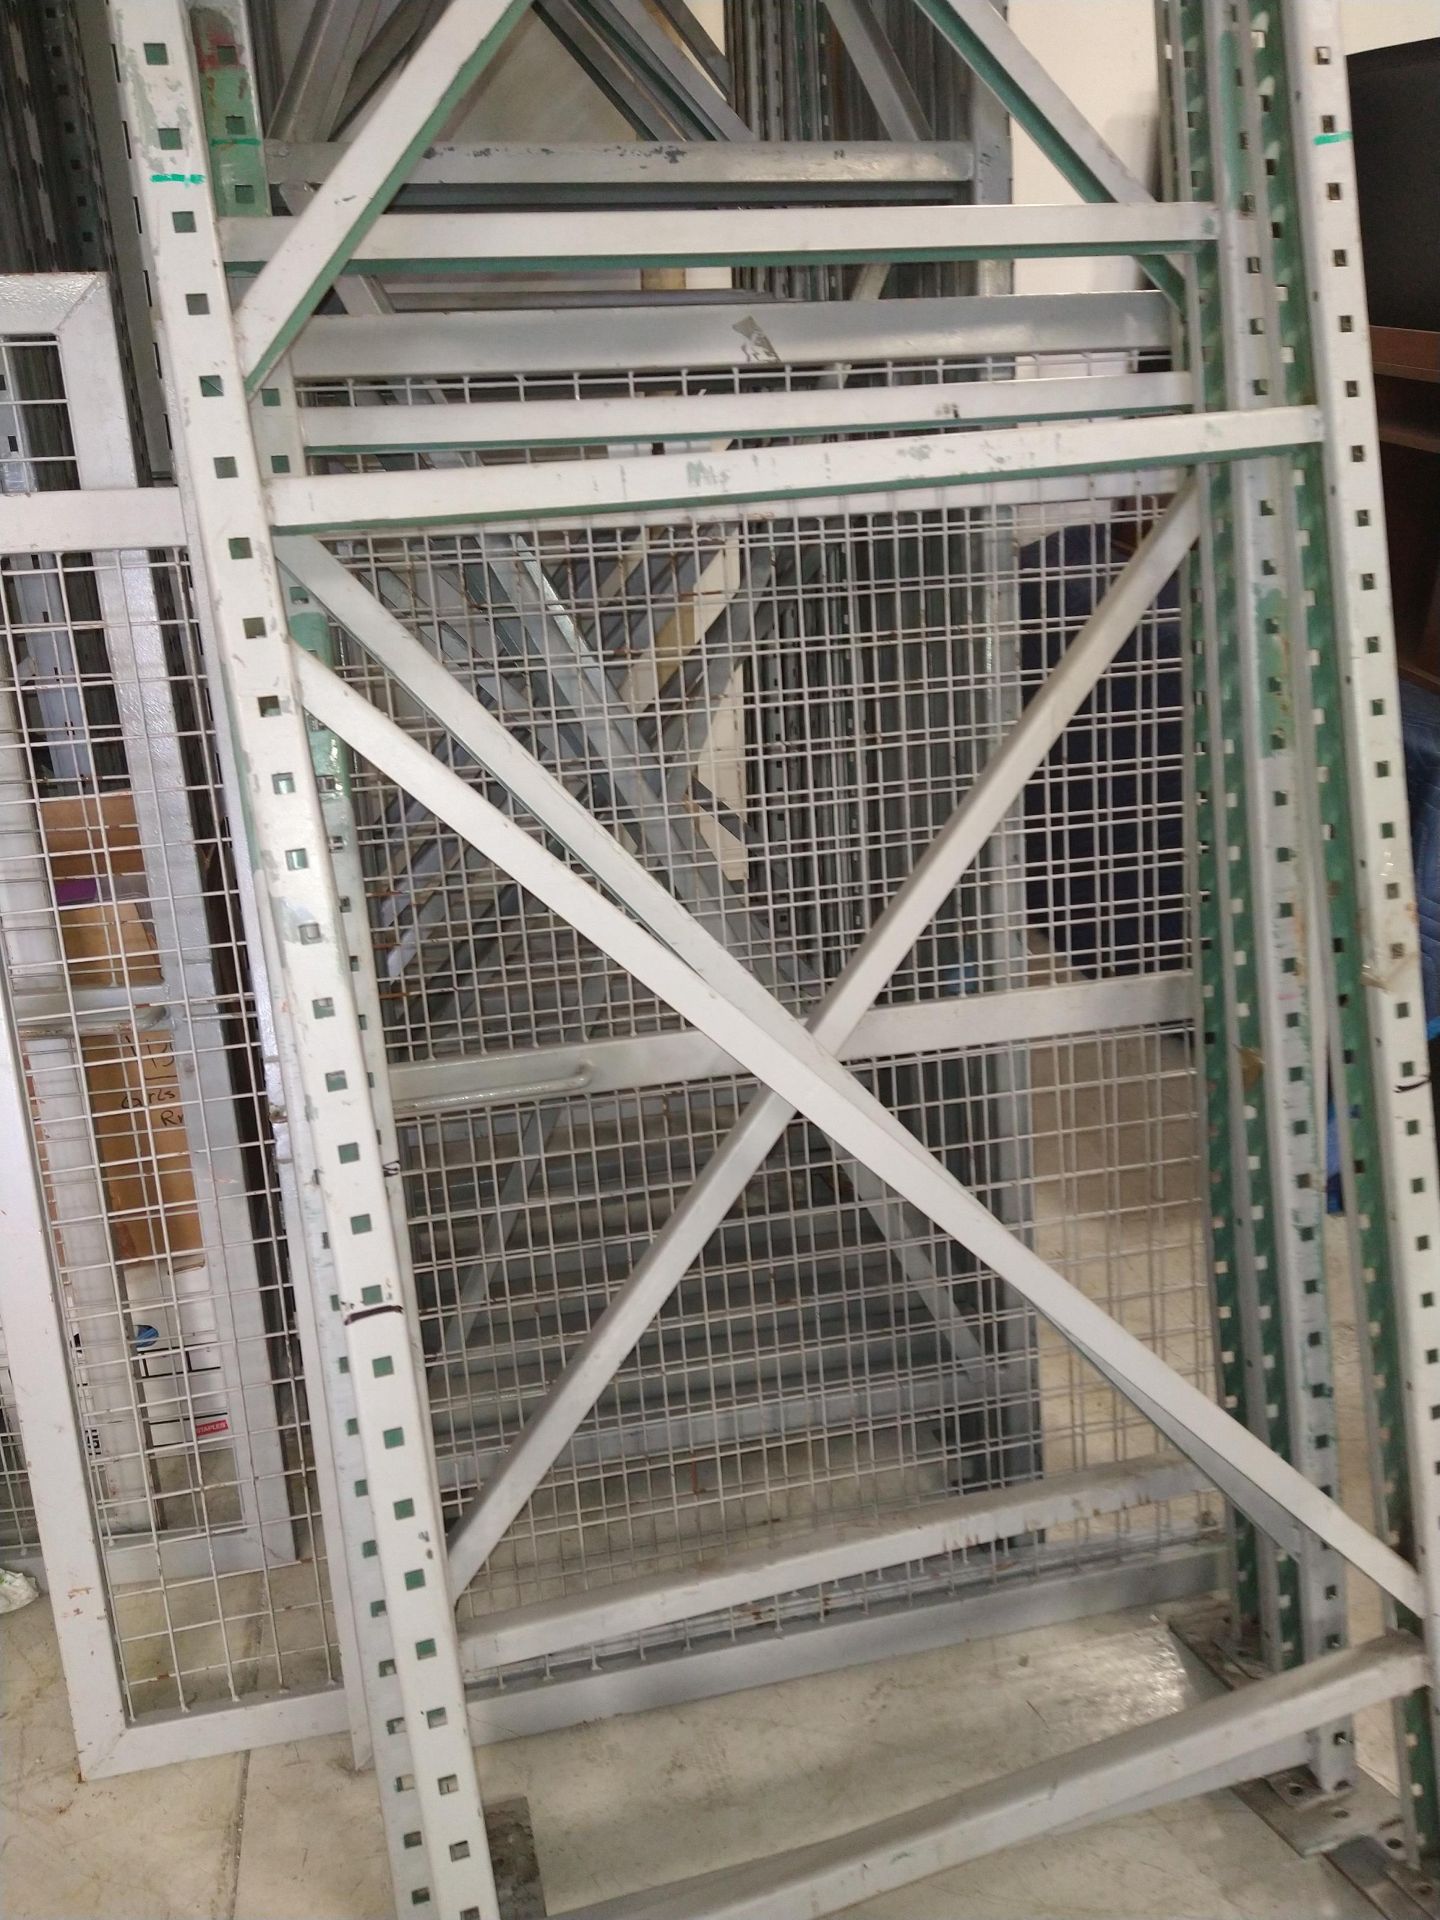 LOT - REMAINING DISASSEMBLED PALLET RACK IN BUILDING (LOCATION: ORANGE, CA) - Image 4 of 9